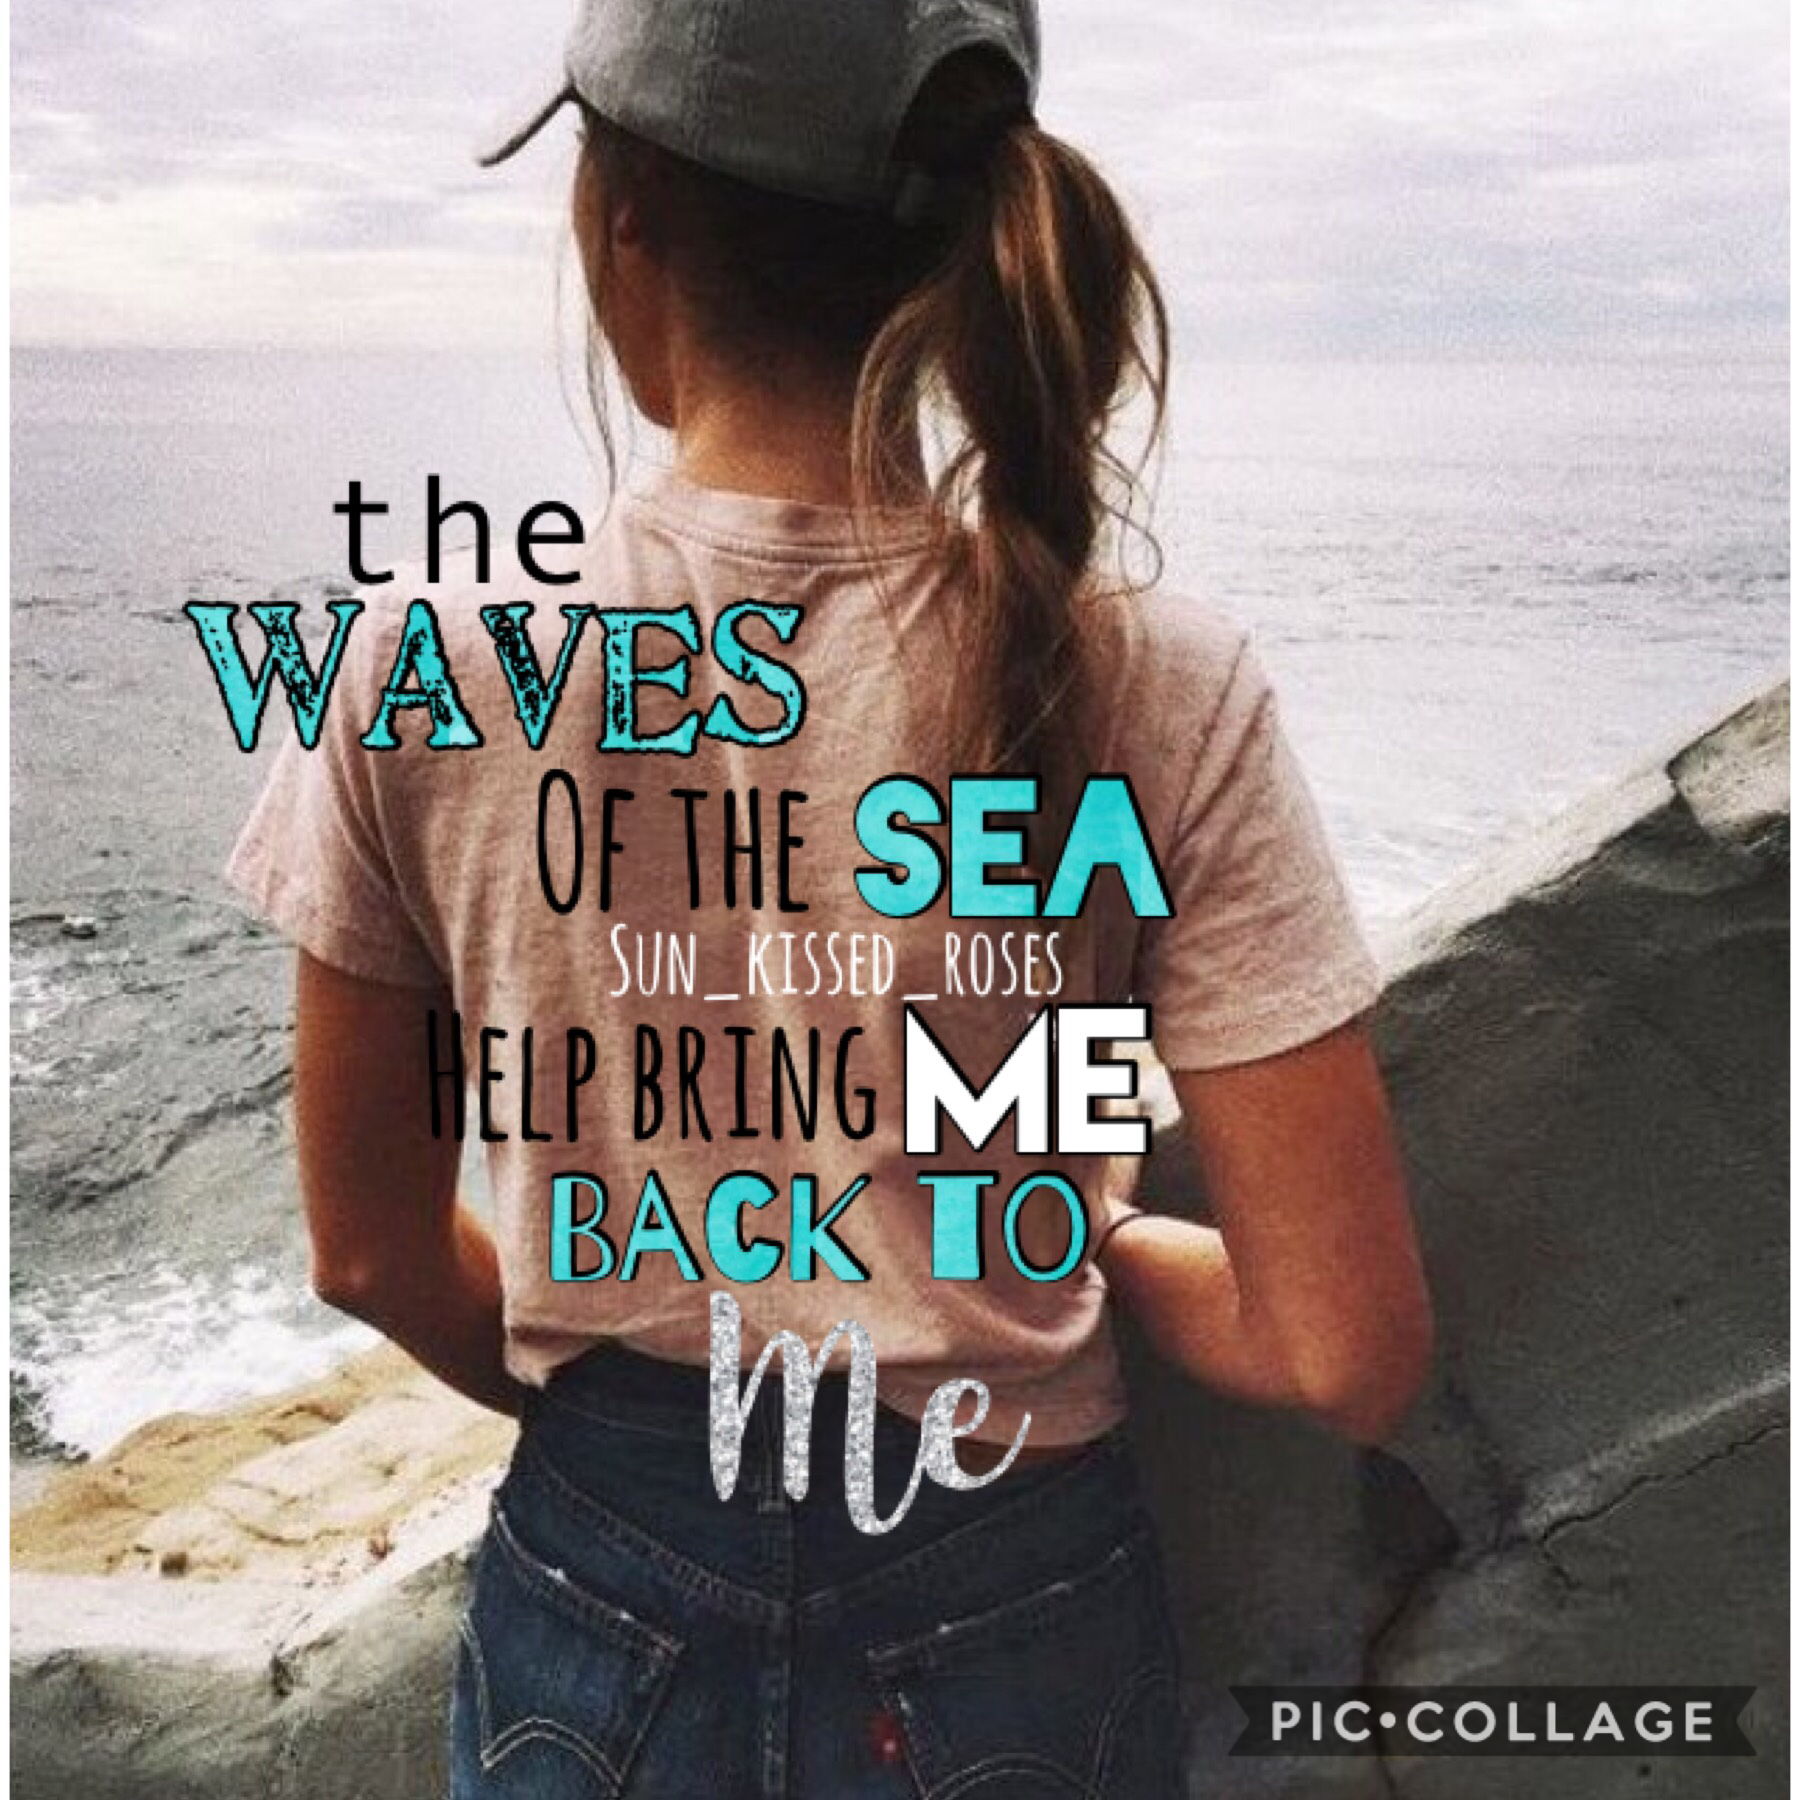 The waves of the sea help bring me back to me